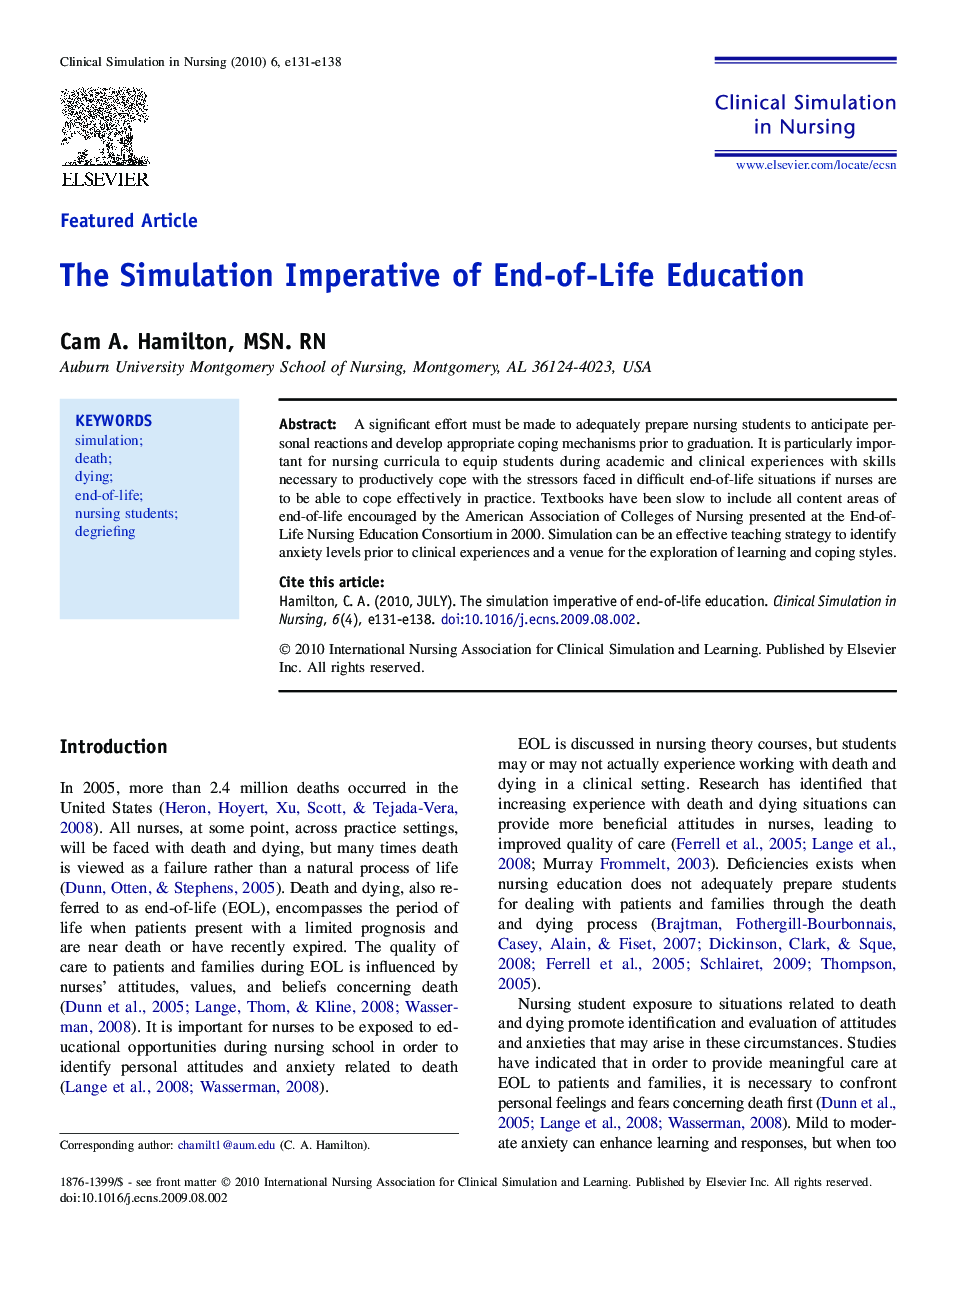 The Simulation Imperative of End-of-Life Education 